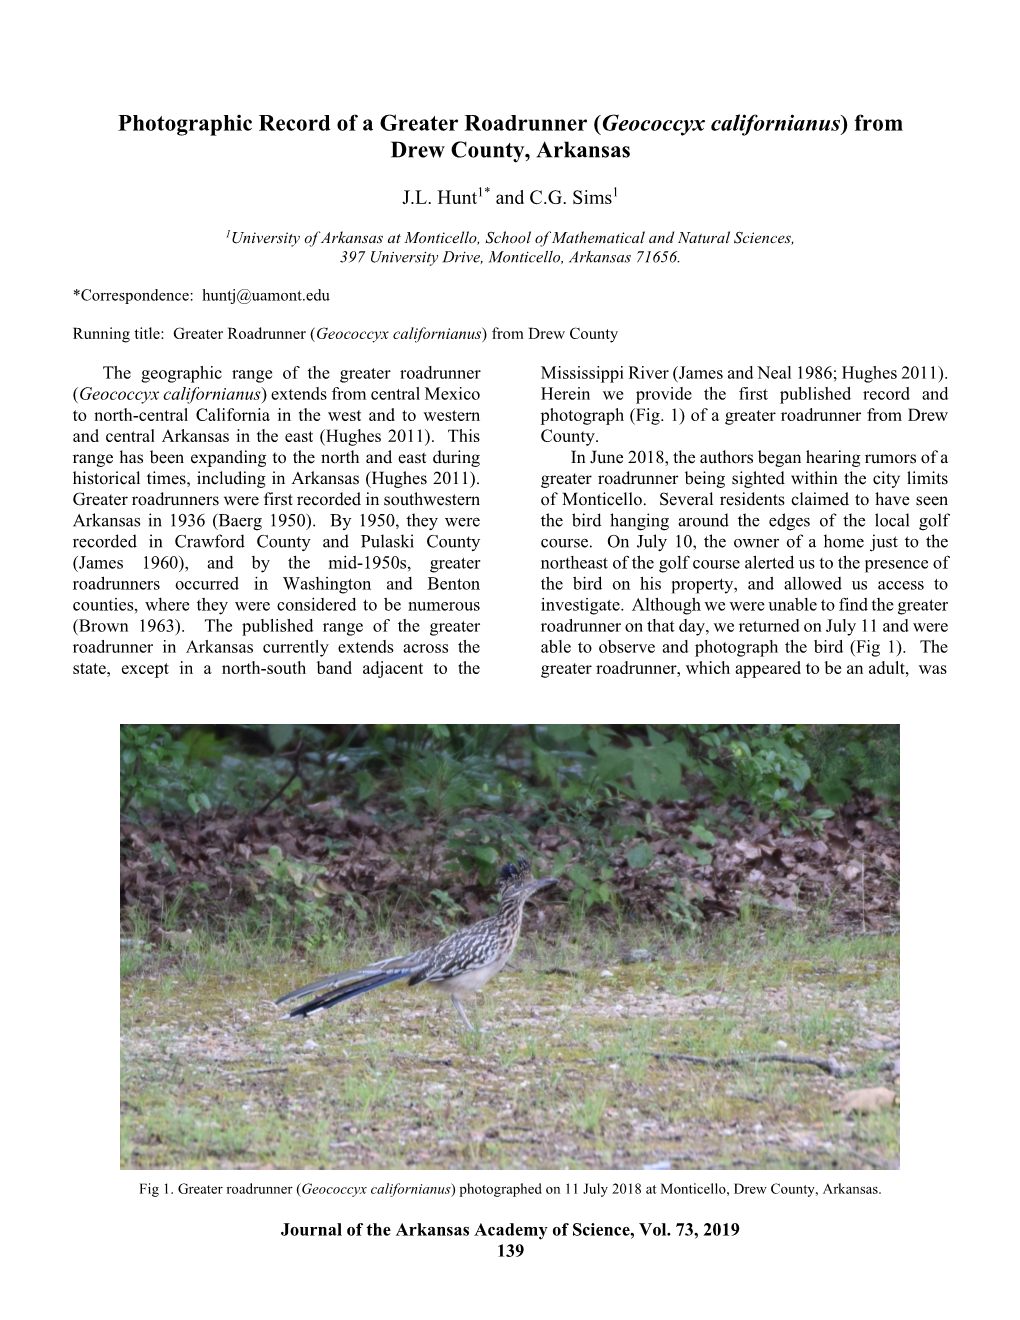 Photographic Record of a Greater Roadrunner (Geococcyx Californianus) from Drew County, Arkansas